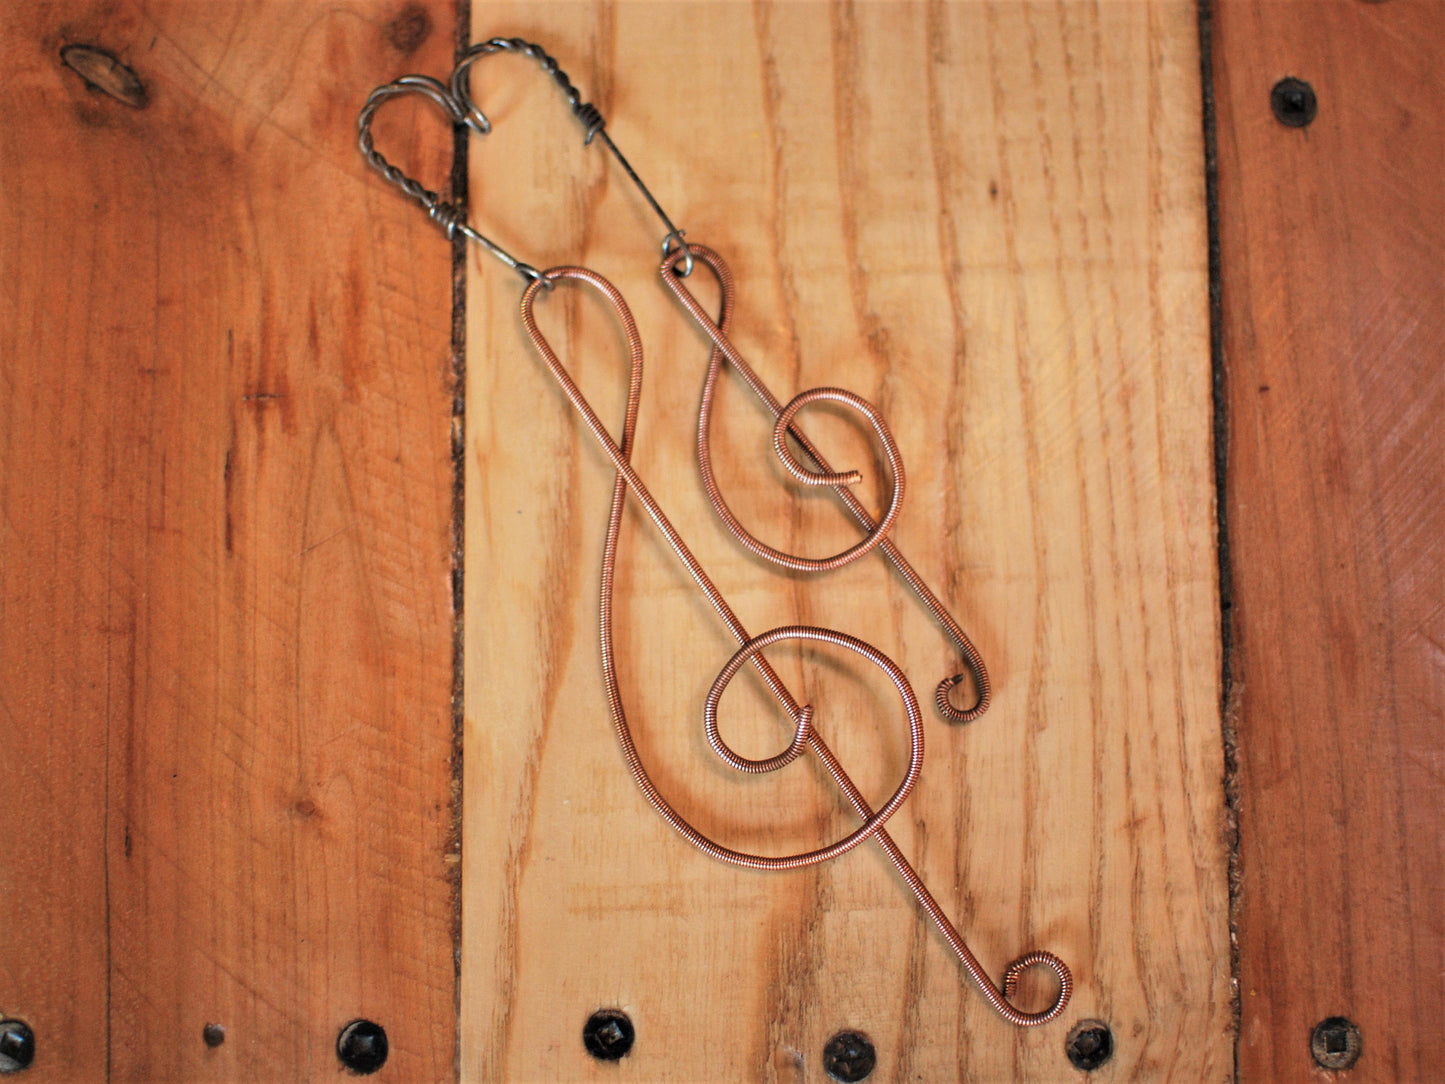 Christmas Ornament, Piano String Ornament, Musical Note, Treble Clef, Ornament, Unique Christmas Gift, Pianist Gift, Piano Students